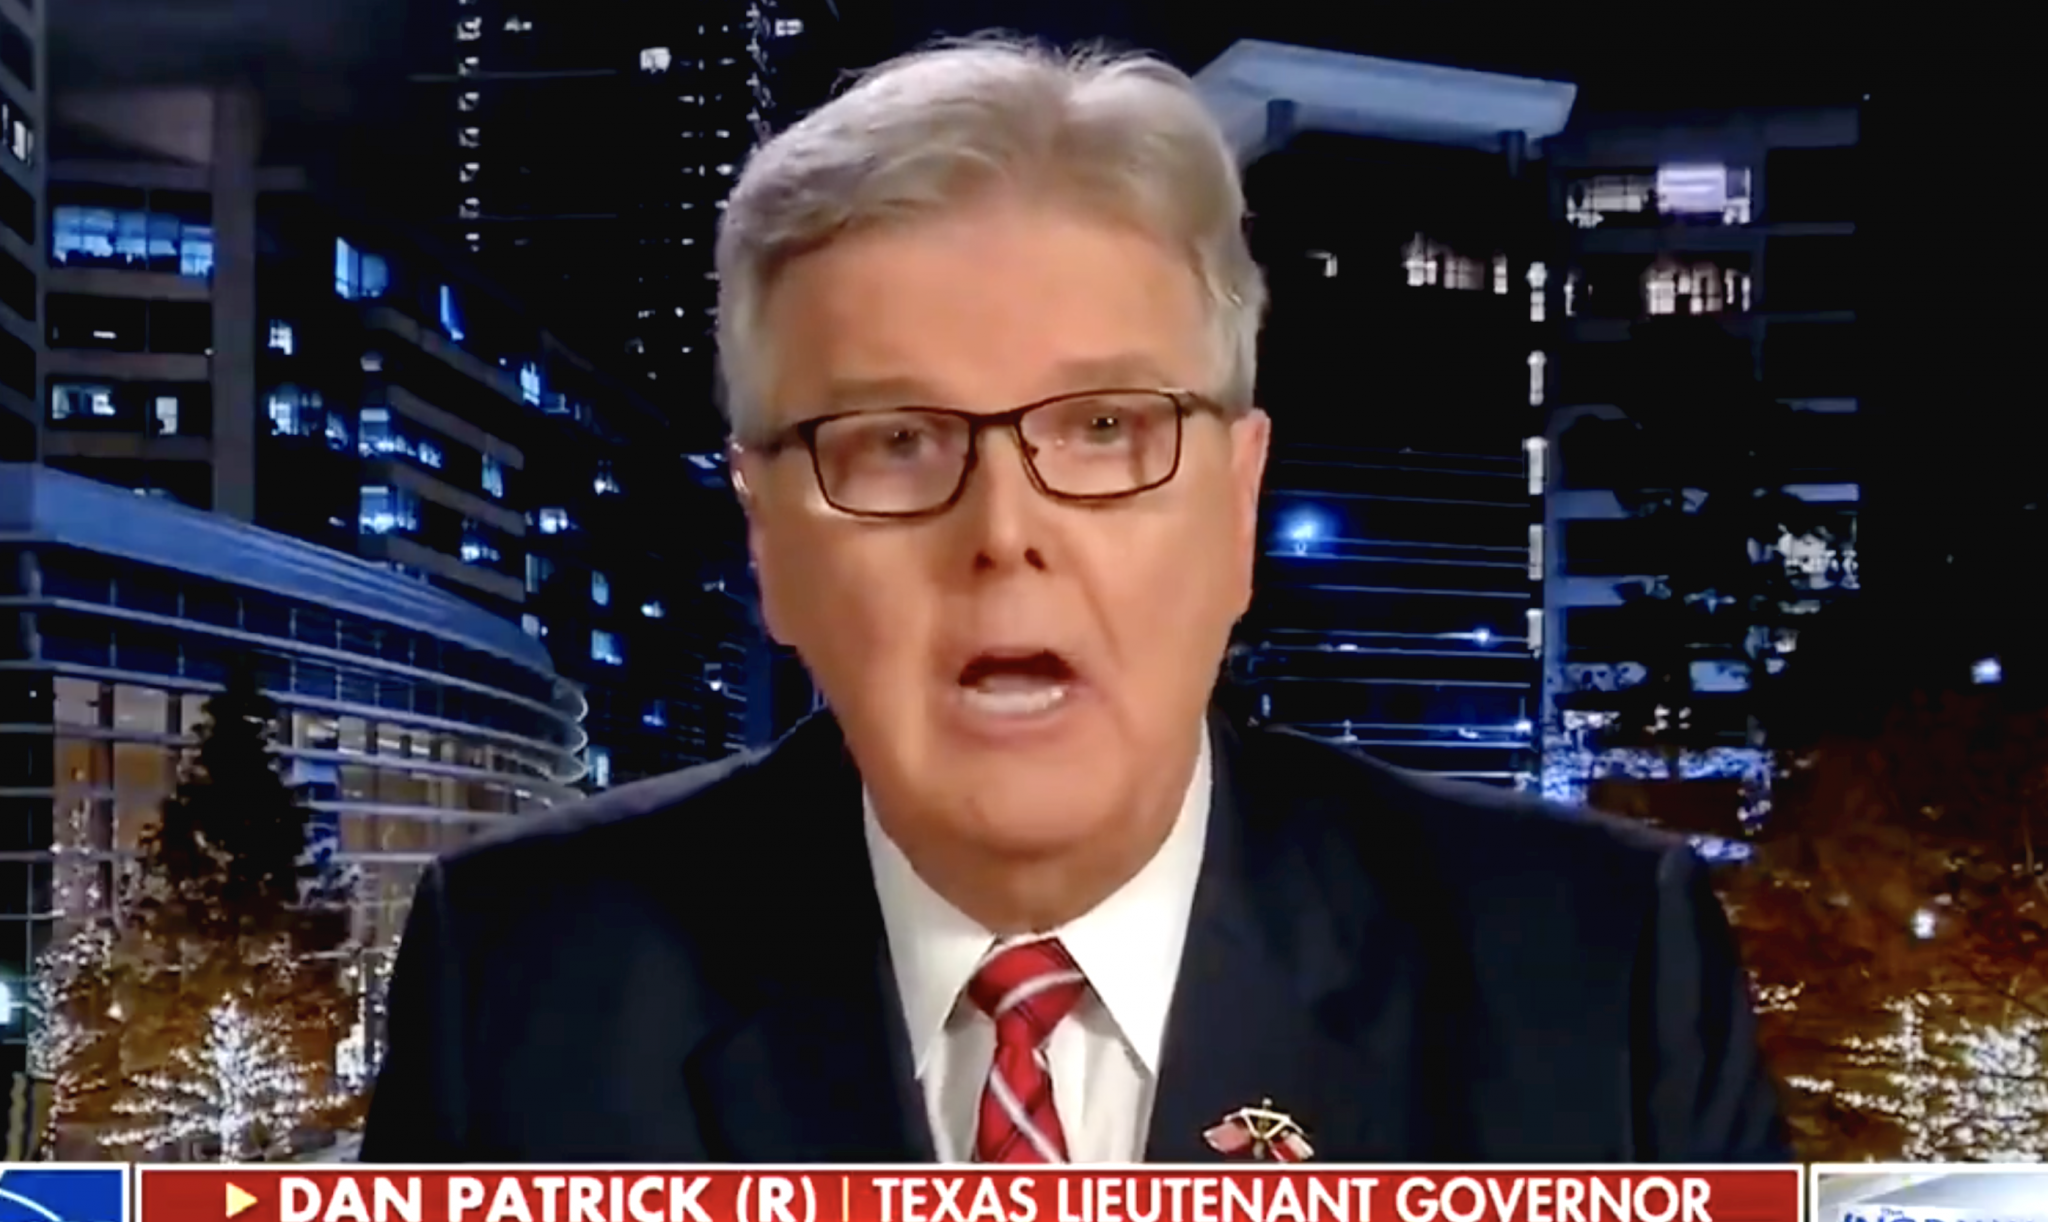 Dan Patrick warns Democrats are allowing in immigrants for “silent